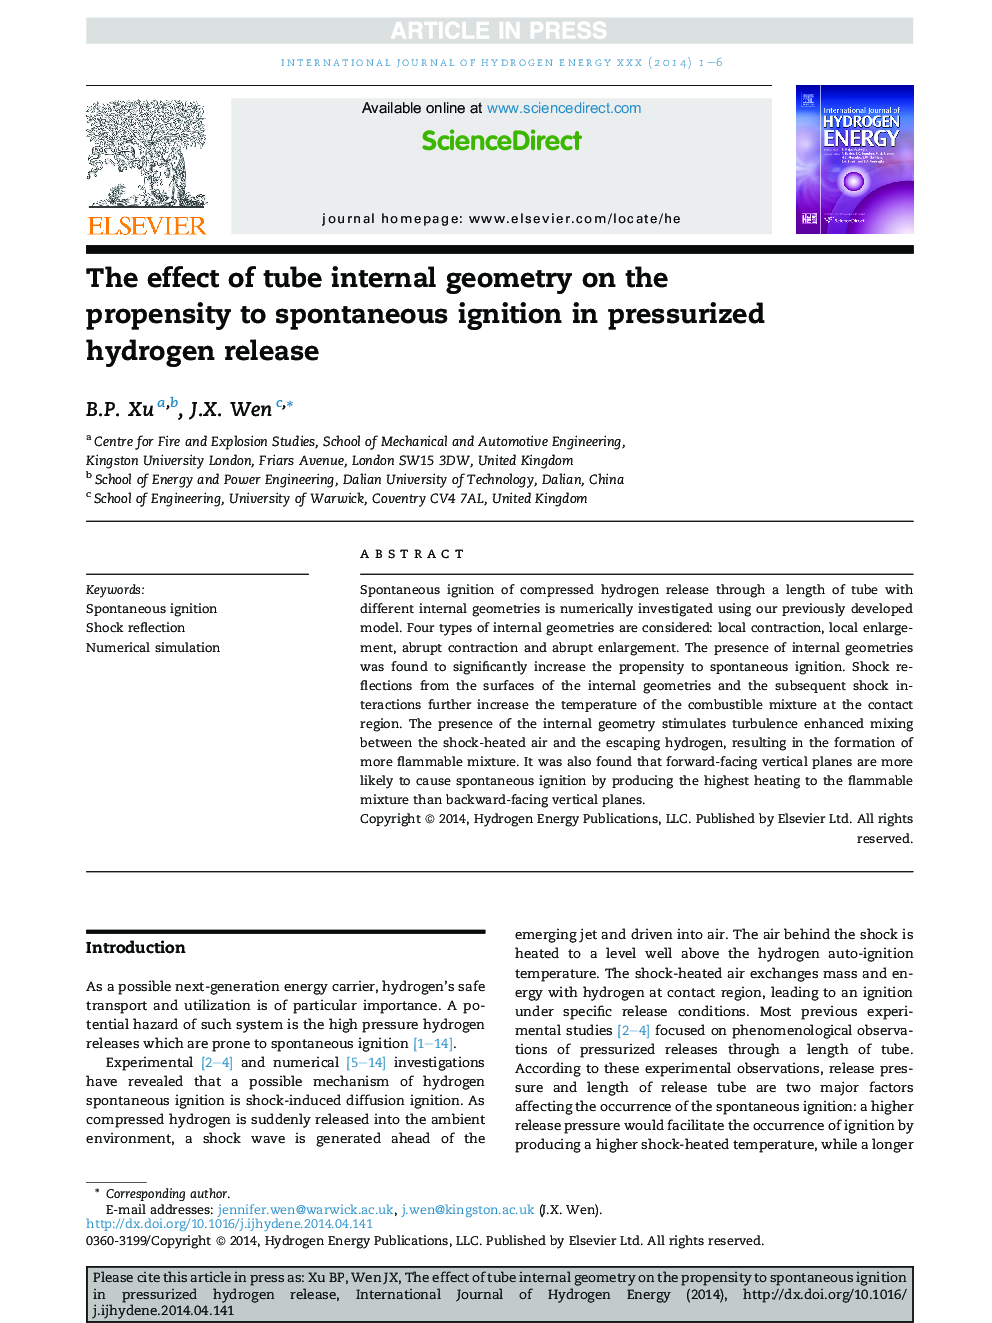 The effect of tube internal geometry on the propensity to spontaneous ignition in pressurized hydrogen release